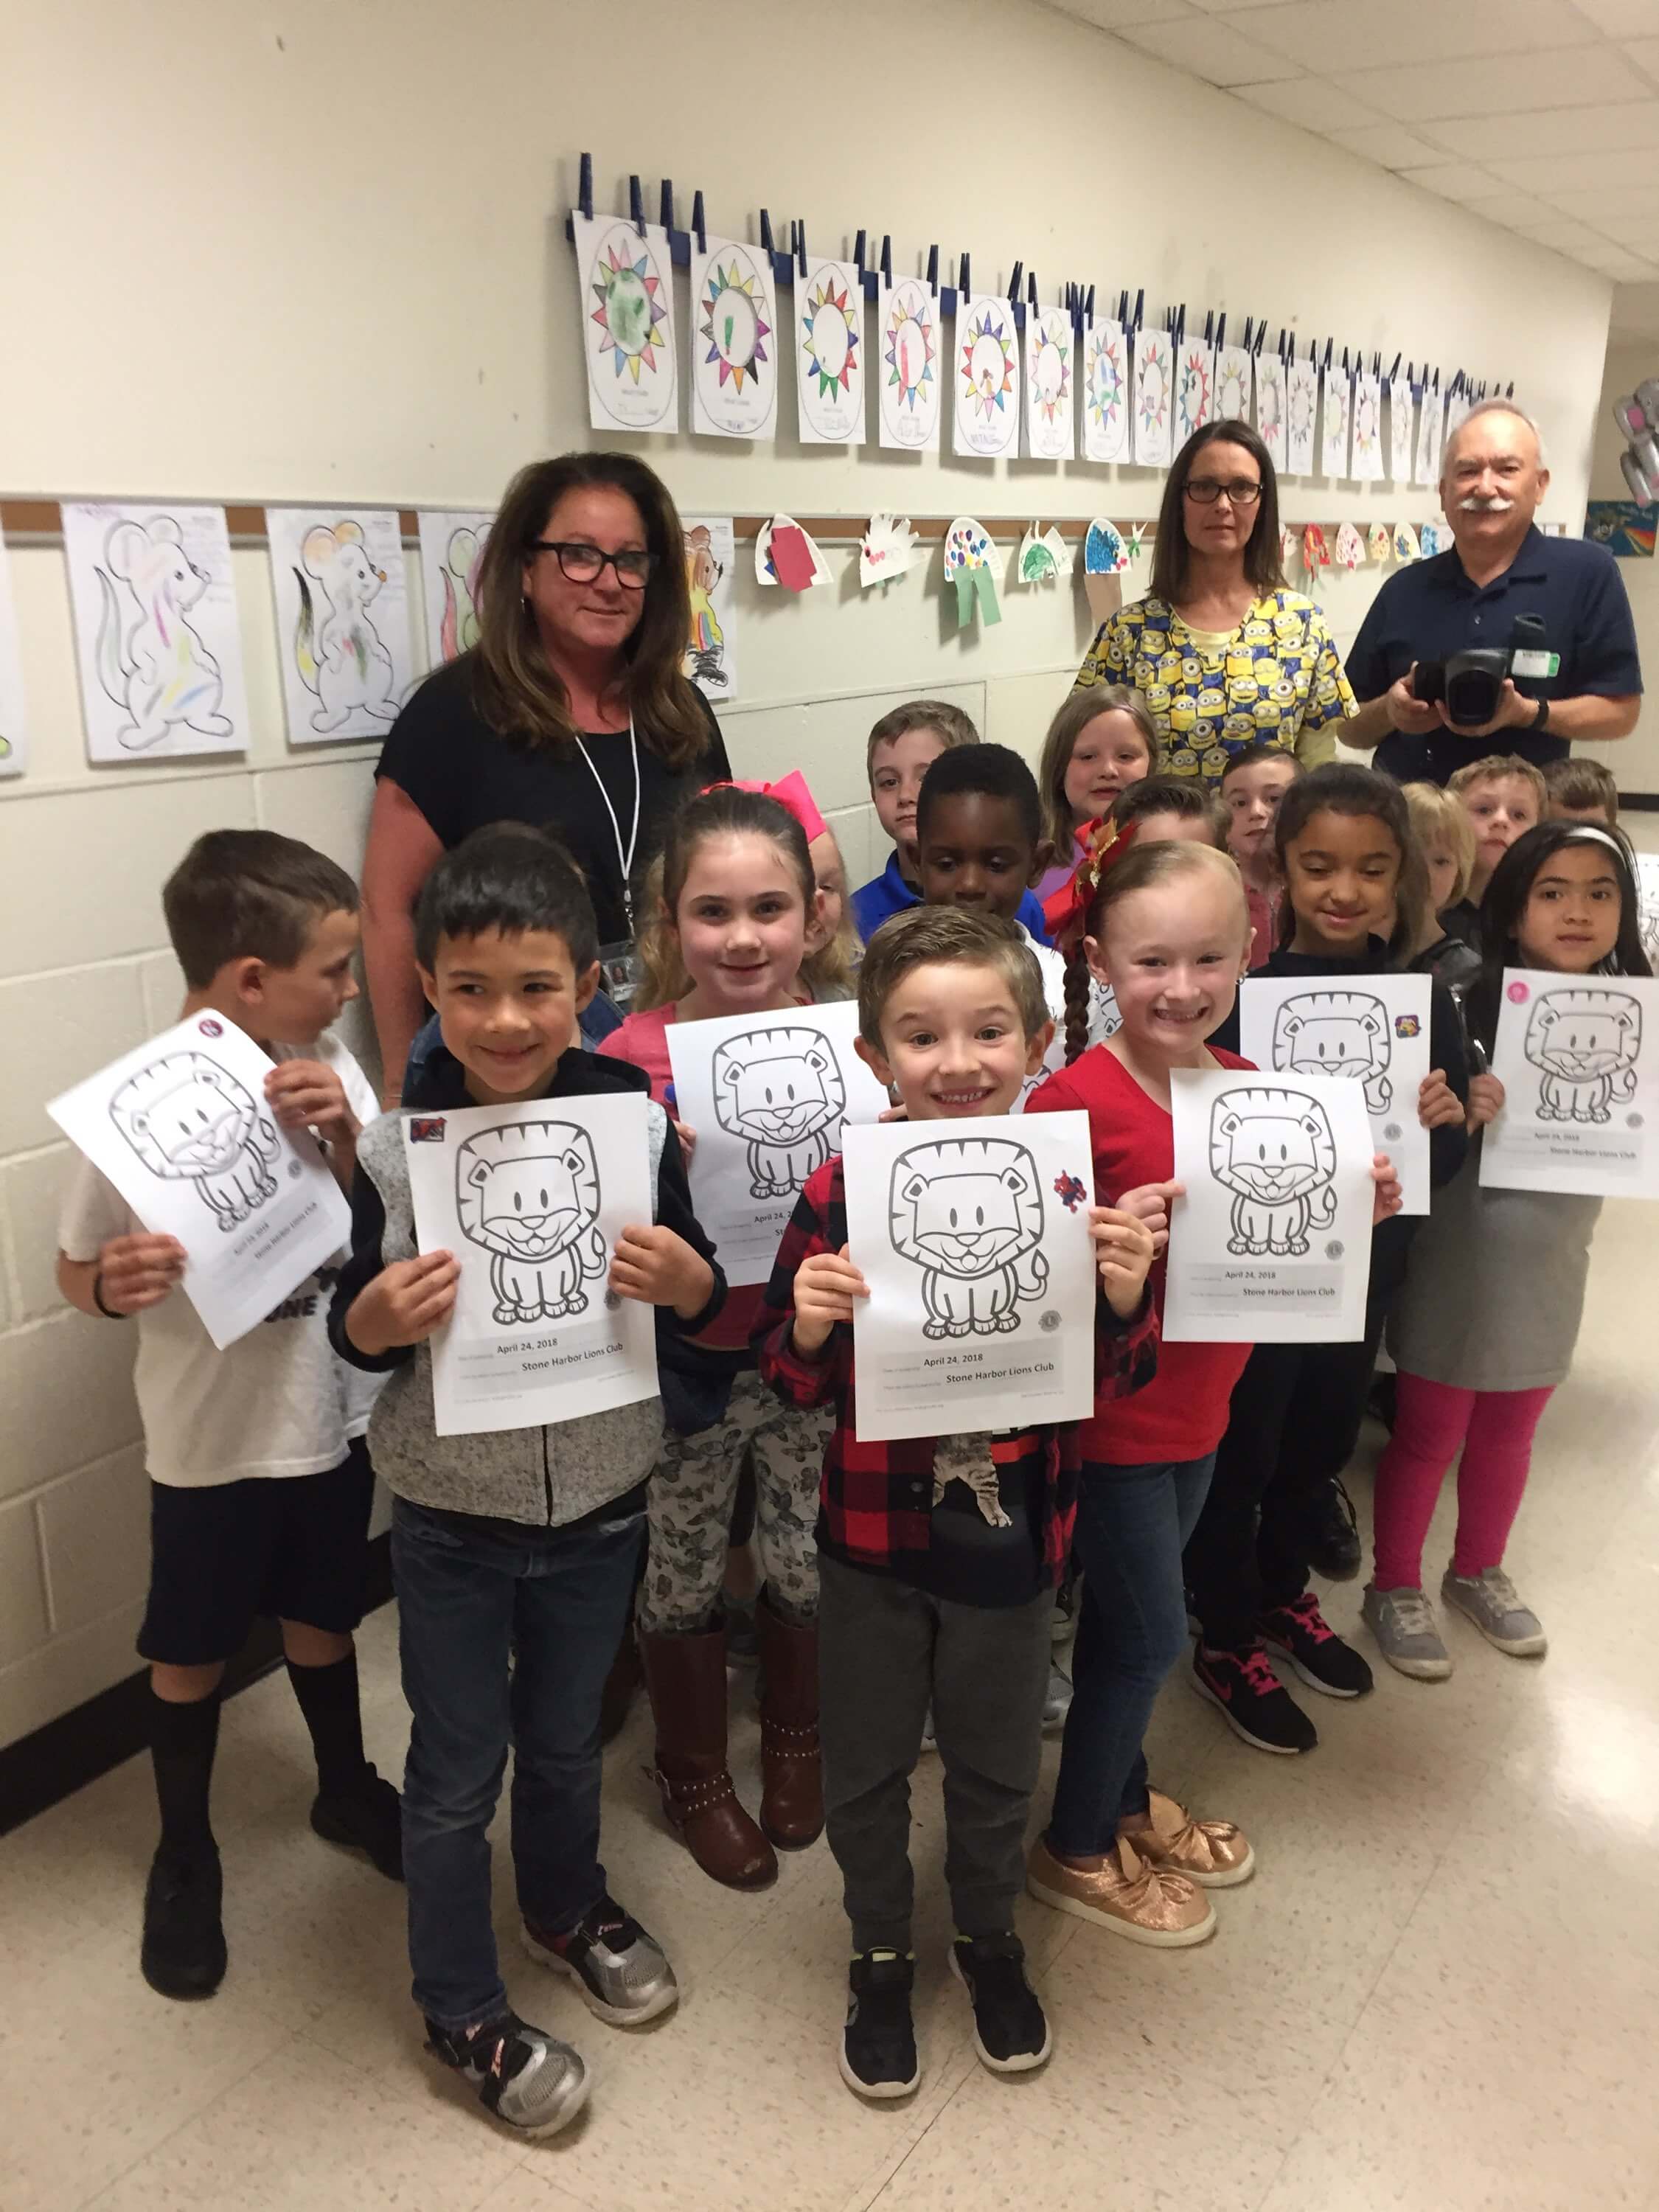 Pictured are Mrs. Mestree and her kindergarten class